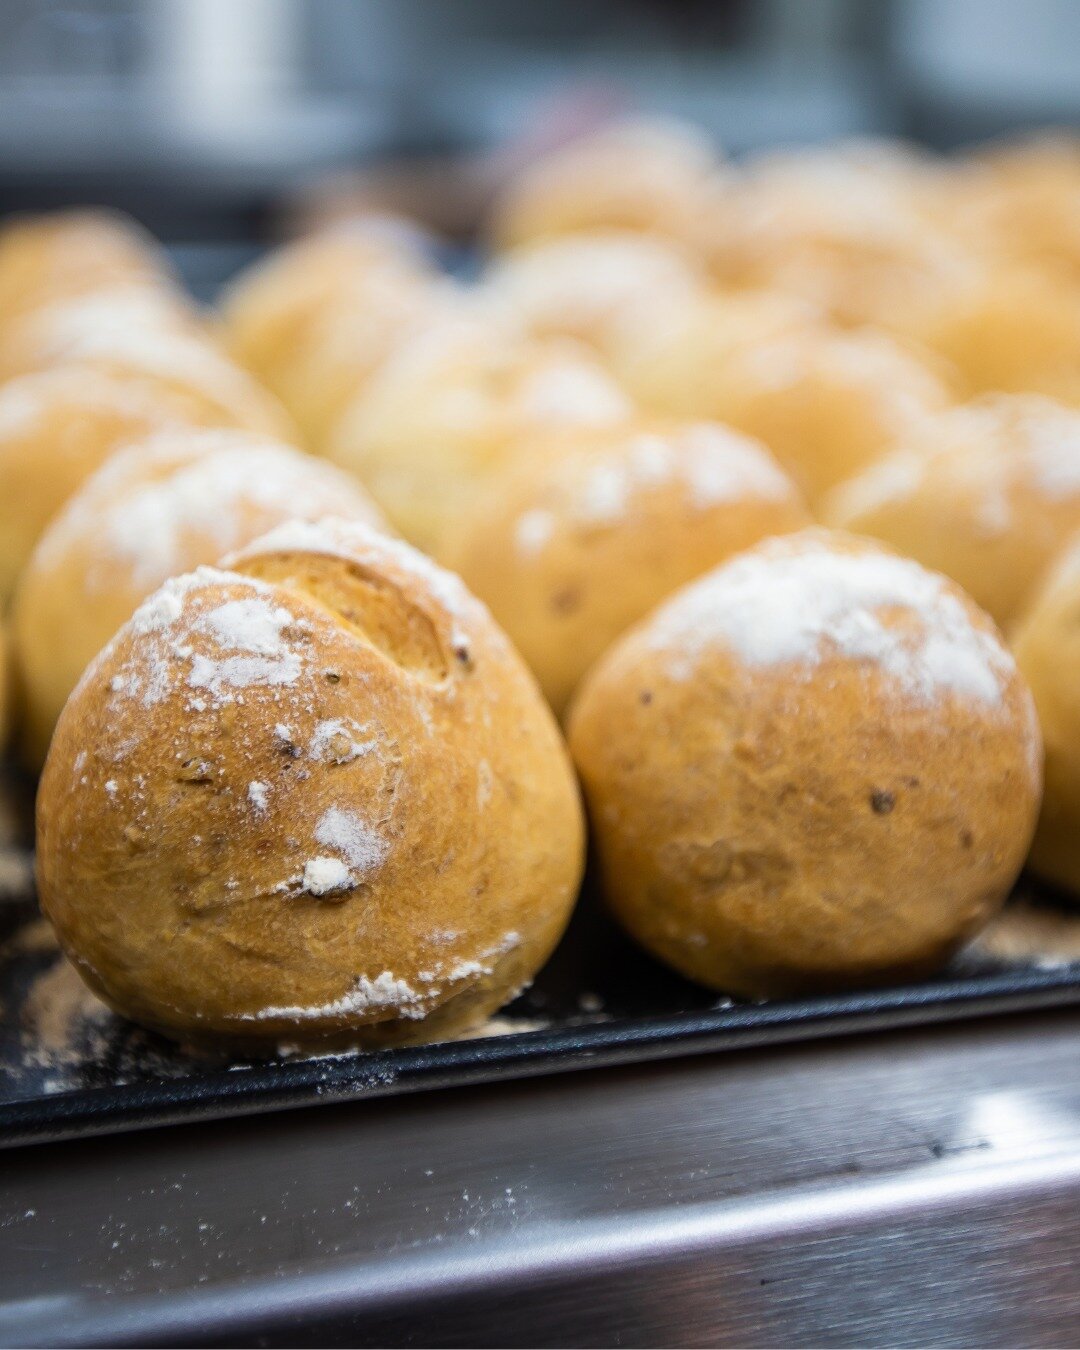 Made and baked in house Norfolk Crunch Bread Rolls&hellip; a customer favourite. 

www.theinghamswan.co.uk